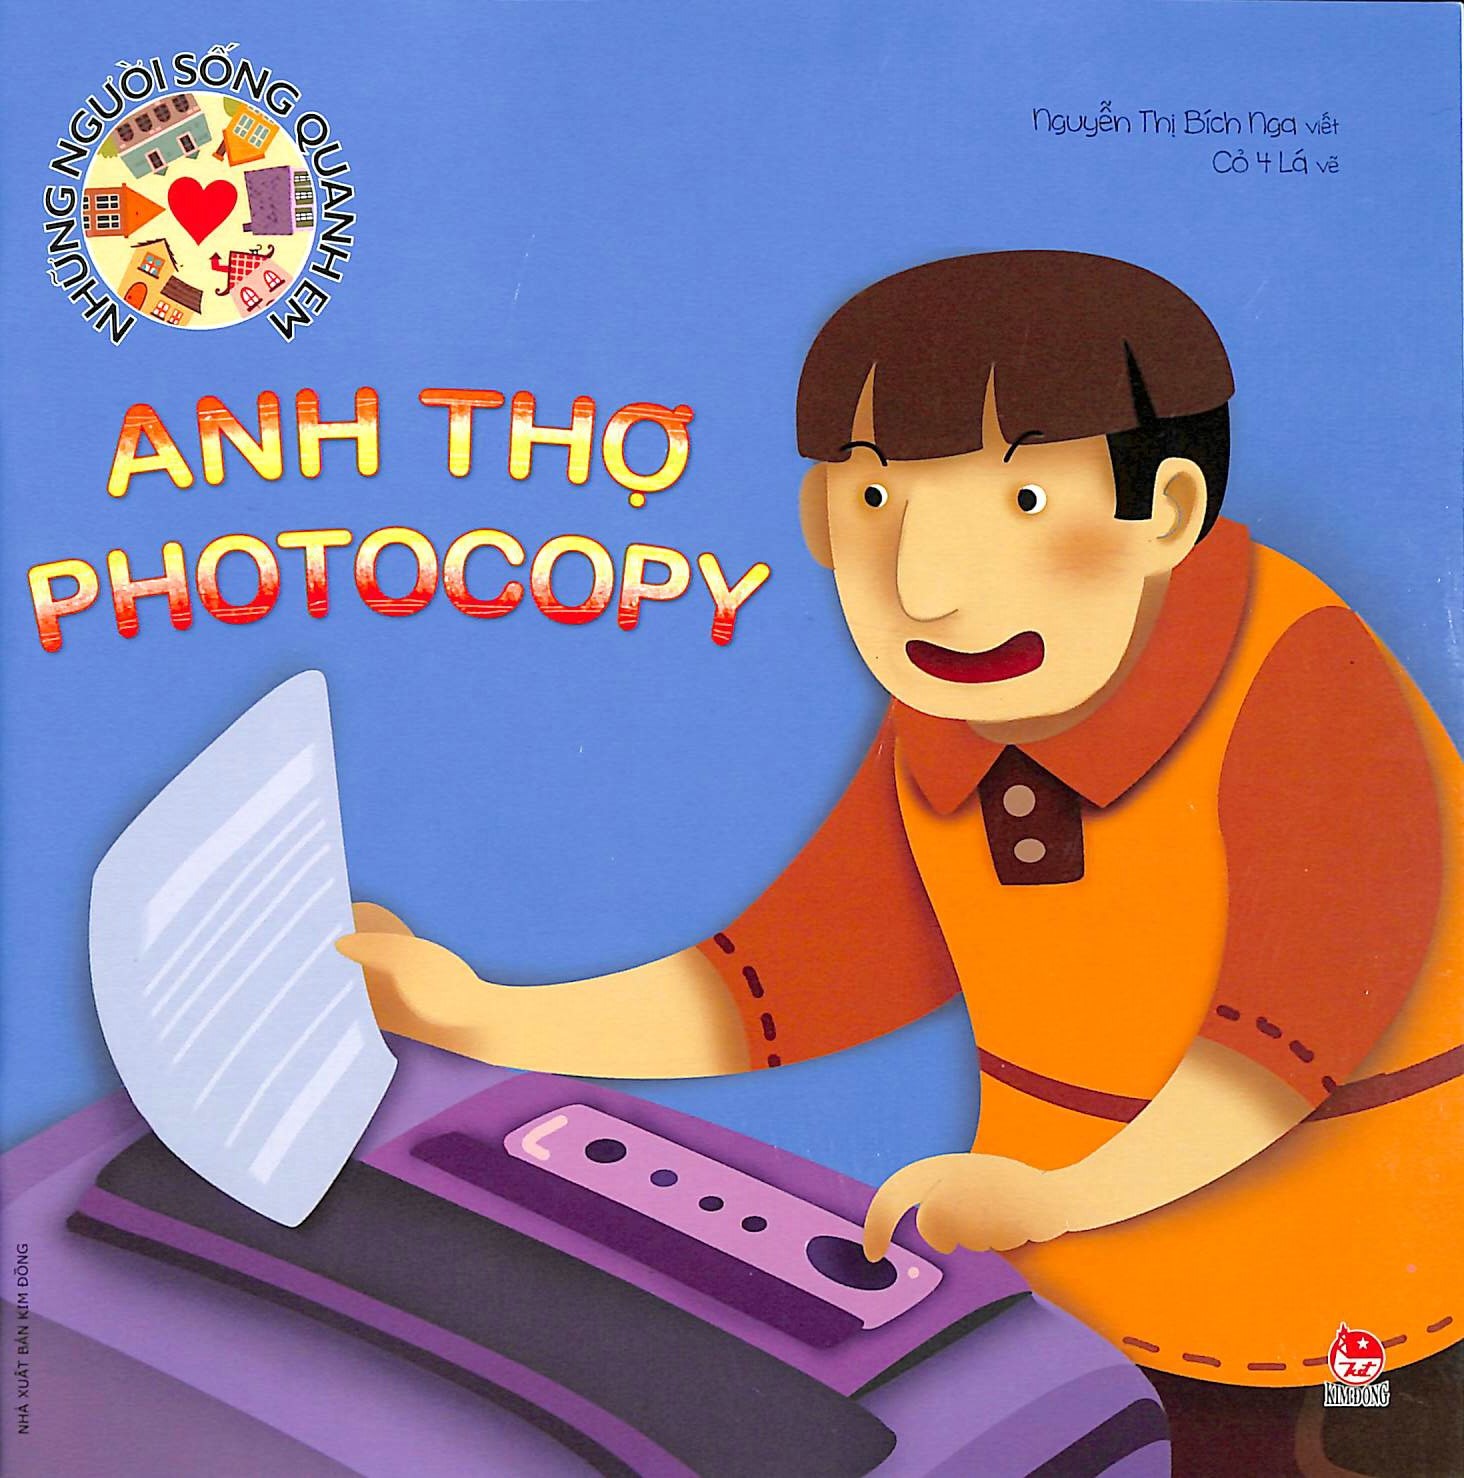 Anh thợ Photocopy